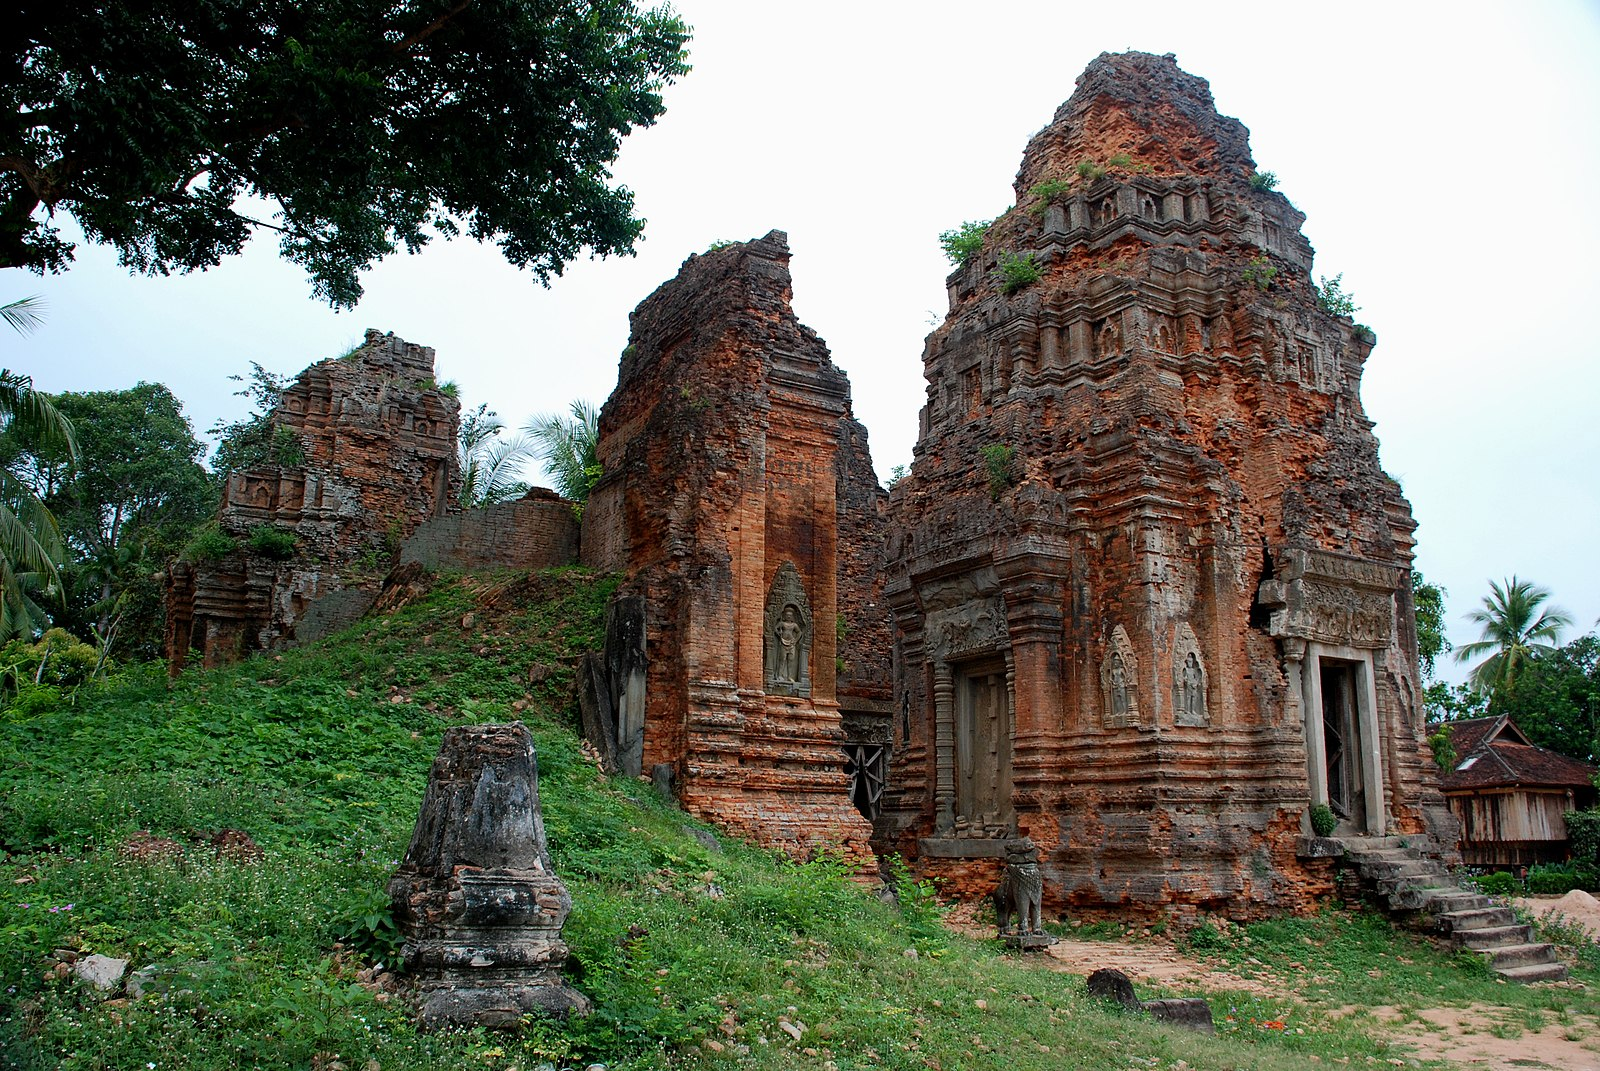 The Roluos Group of Temples in Siem Reap are more well preserved than most